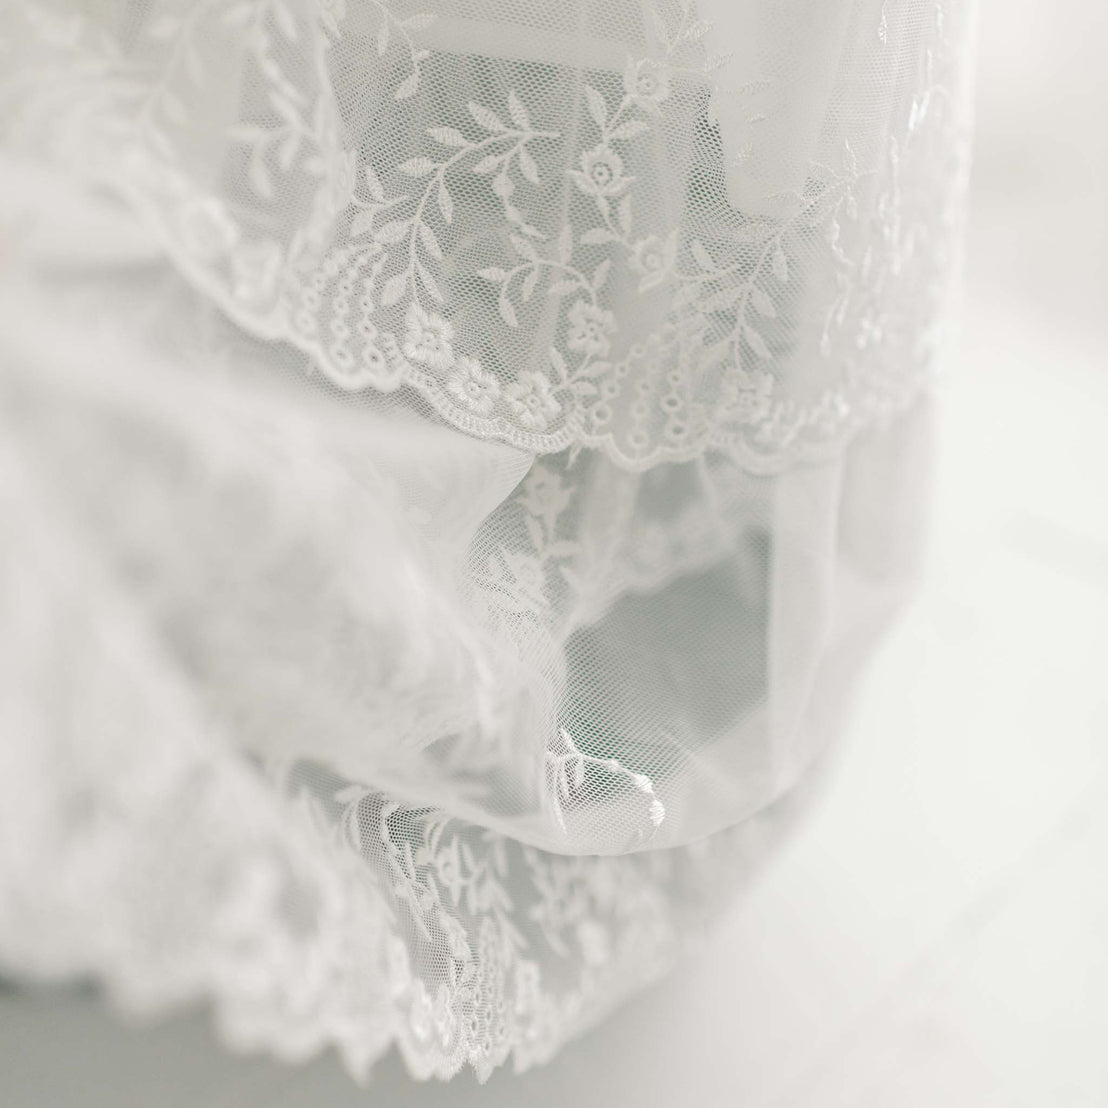 Close-up image of delicate, white lace fabric with intricate floral patterns and scalloped edges, featured on the Ella Christening Gown. The background is softly blurred.